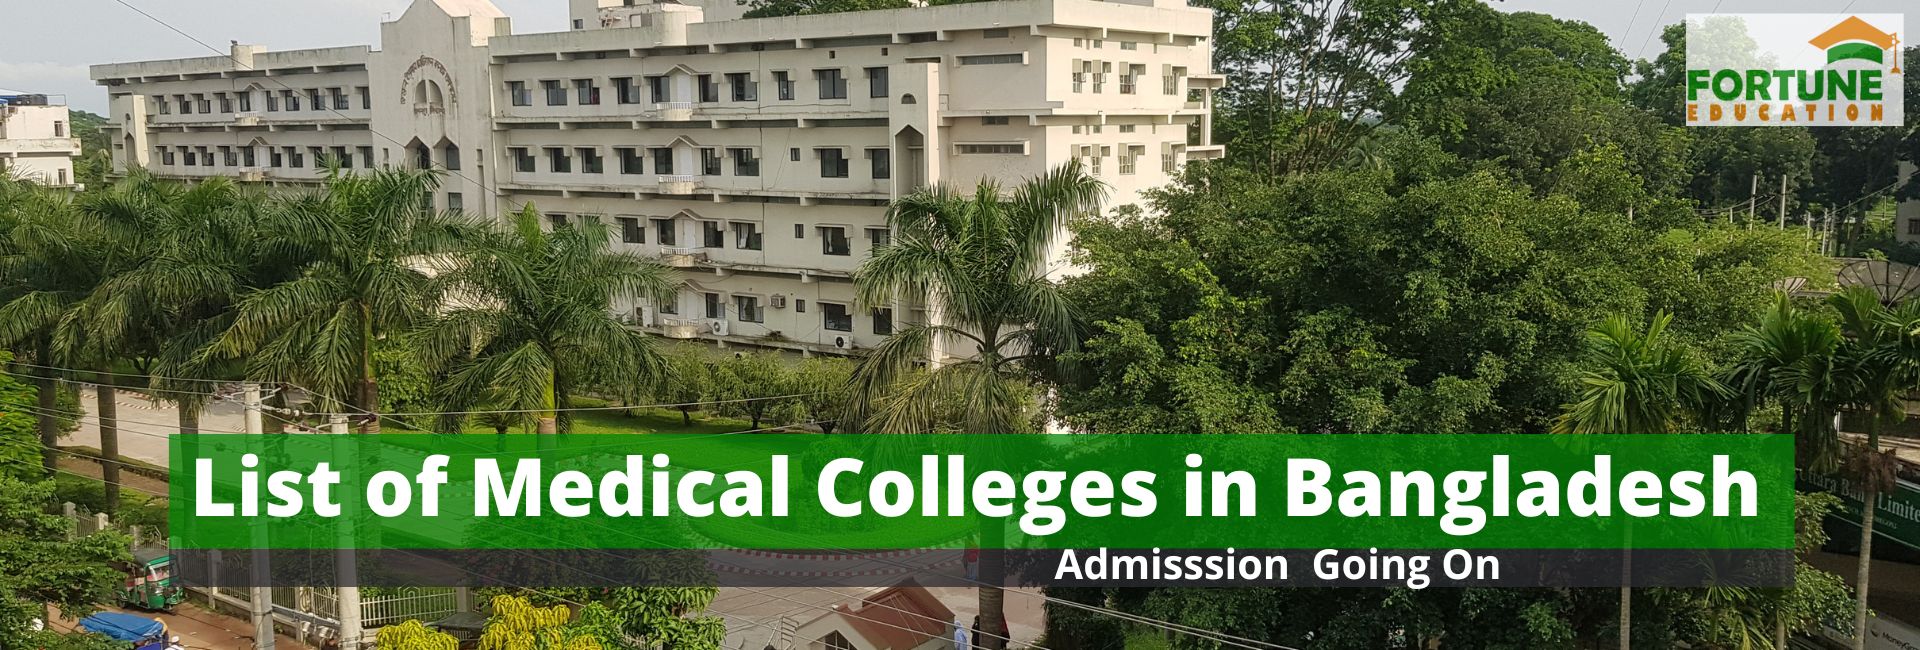 List of Medical Colleges in Bangladesh